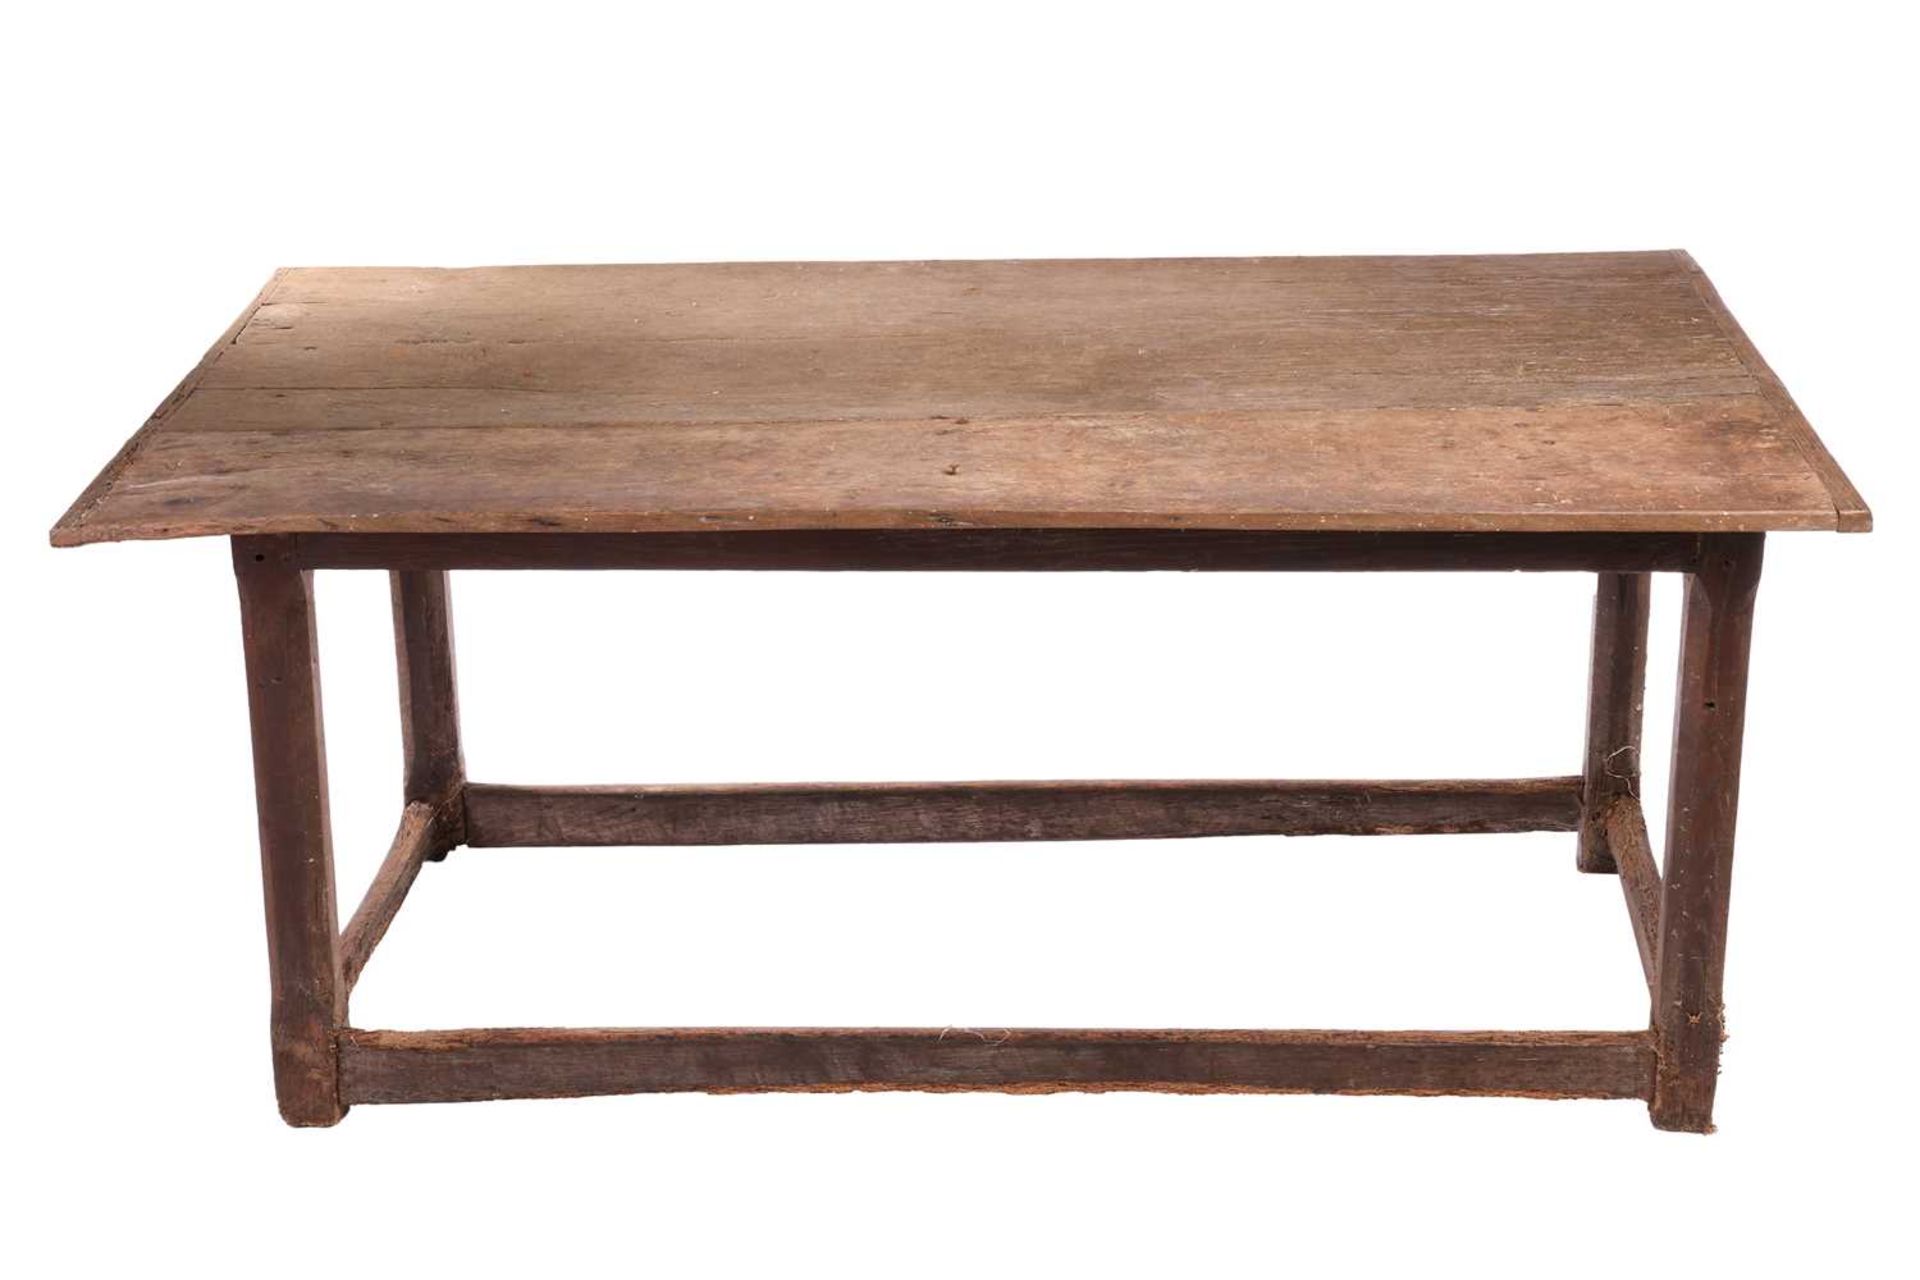 A rustic oak rectangular tavern table, 17th/18th century and later repairs, with a broad planked and